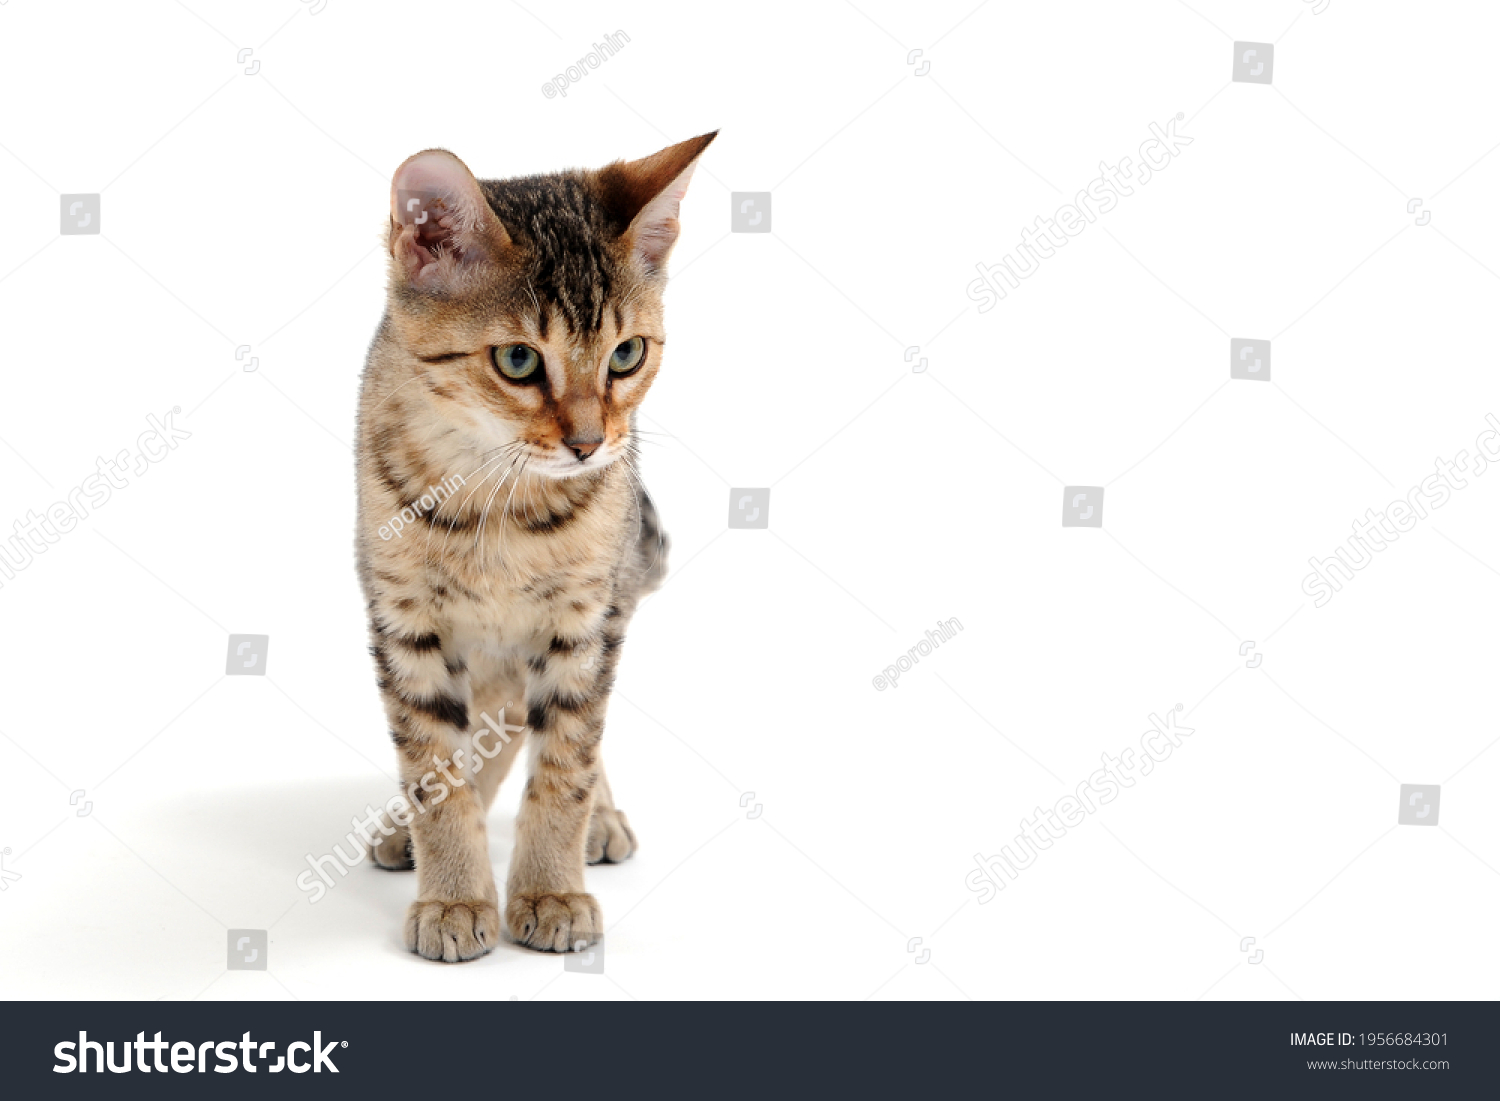 A purebred smooth-haired cat stands on a white background #1956684301